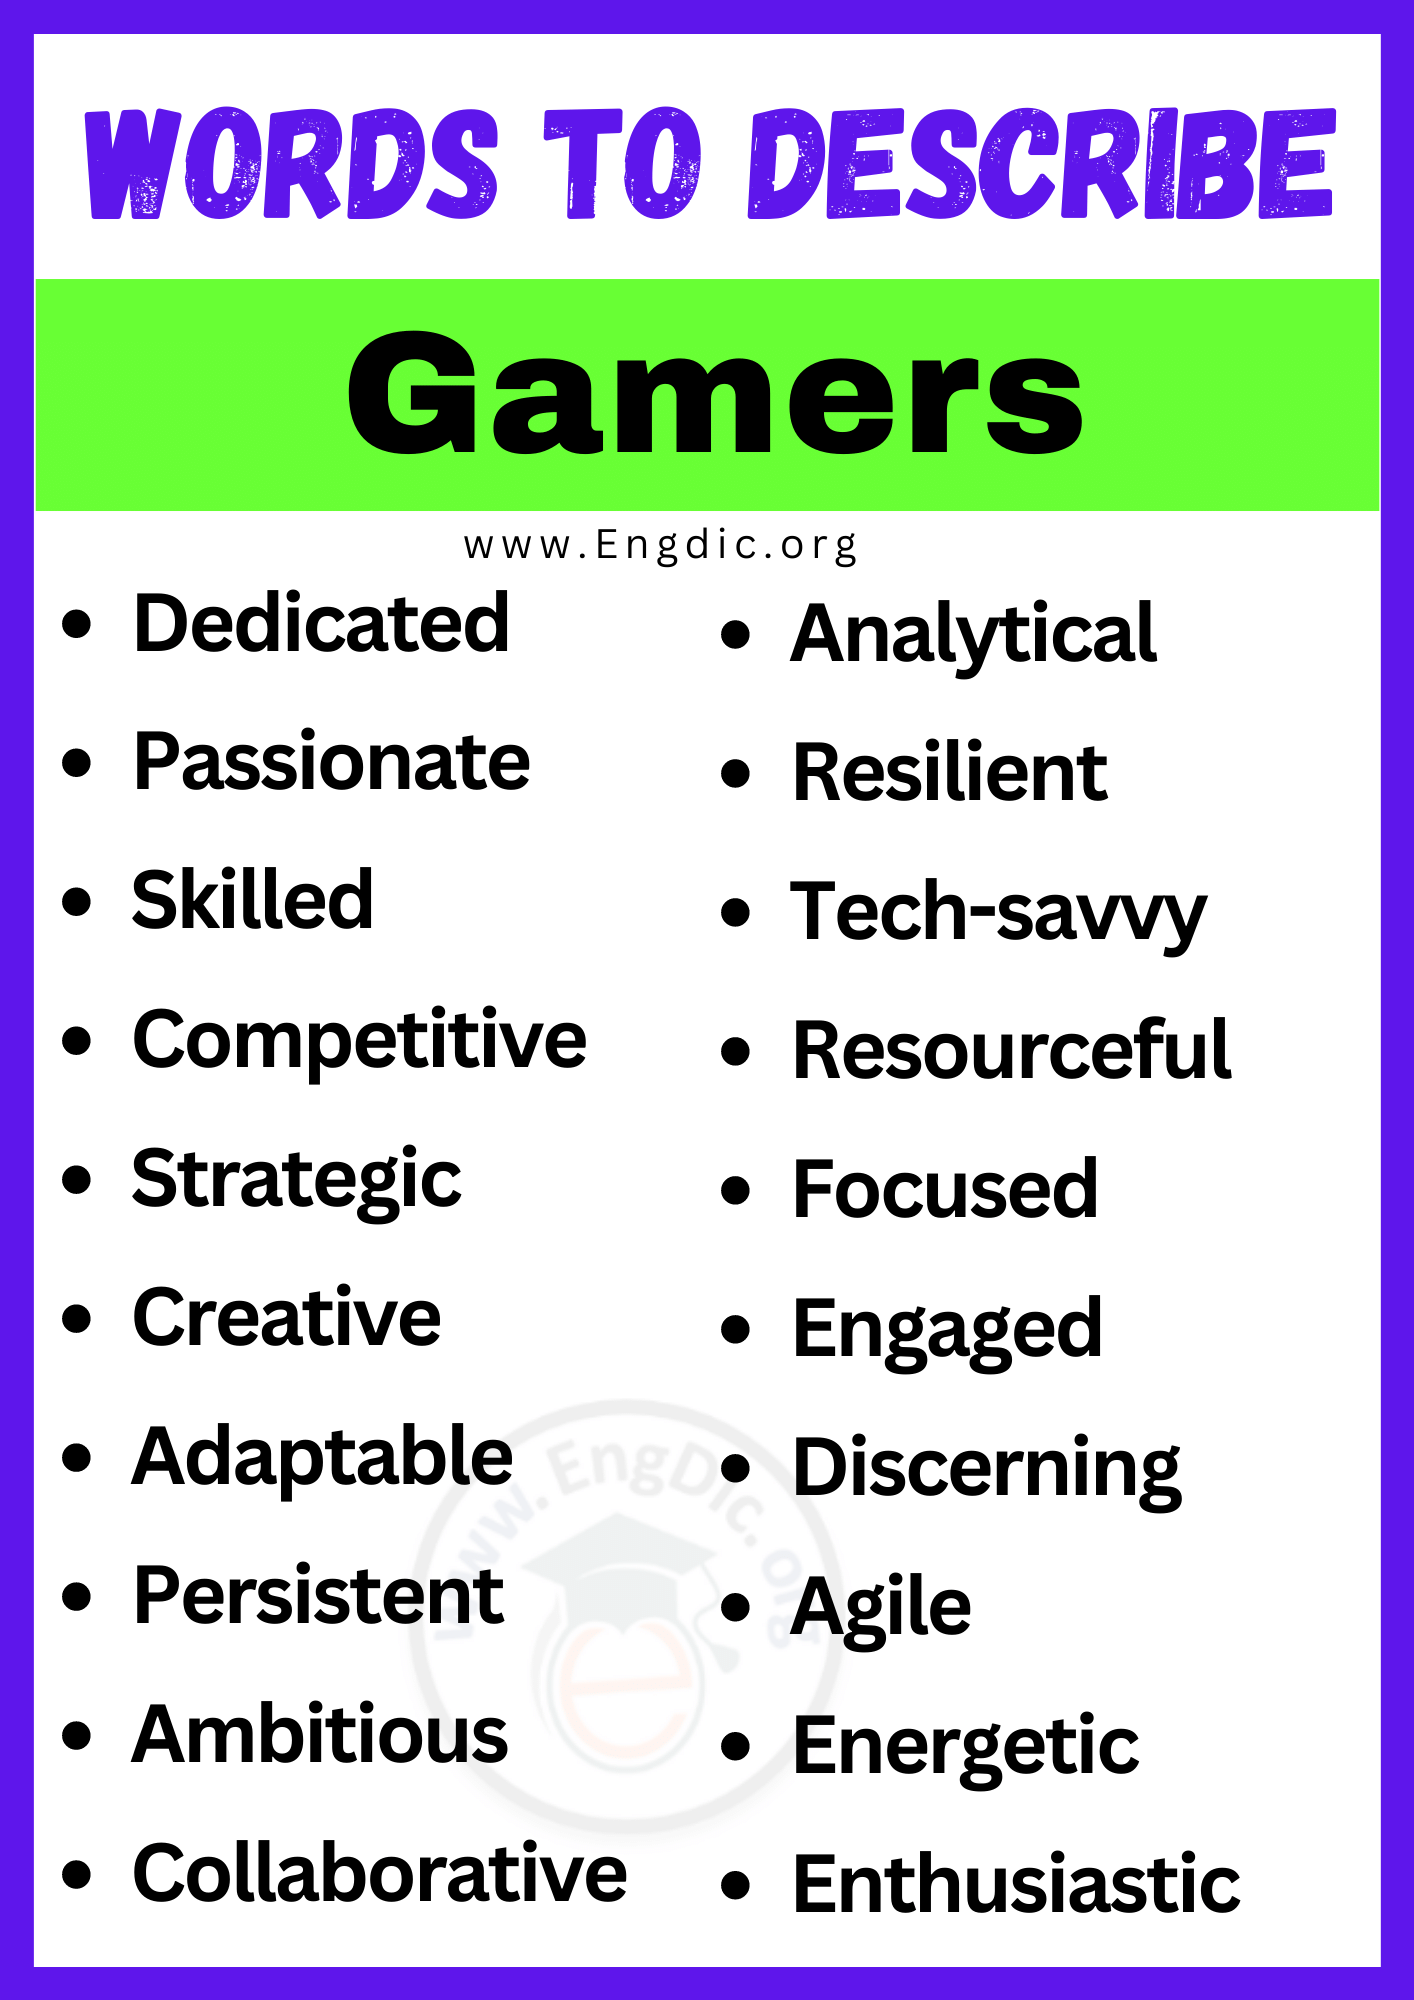 Words to Describe Gamers